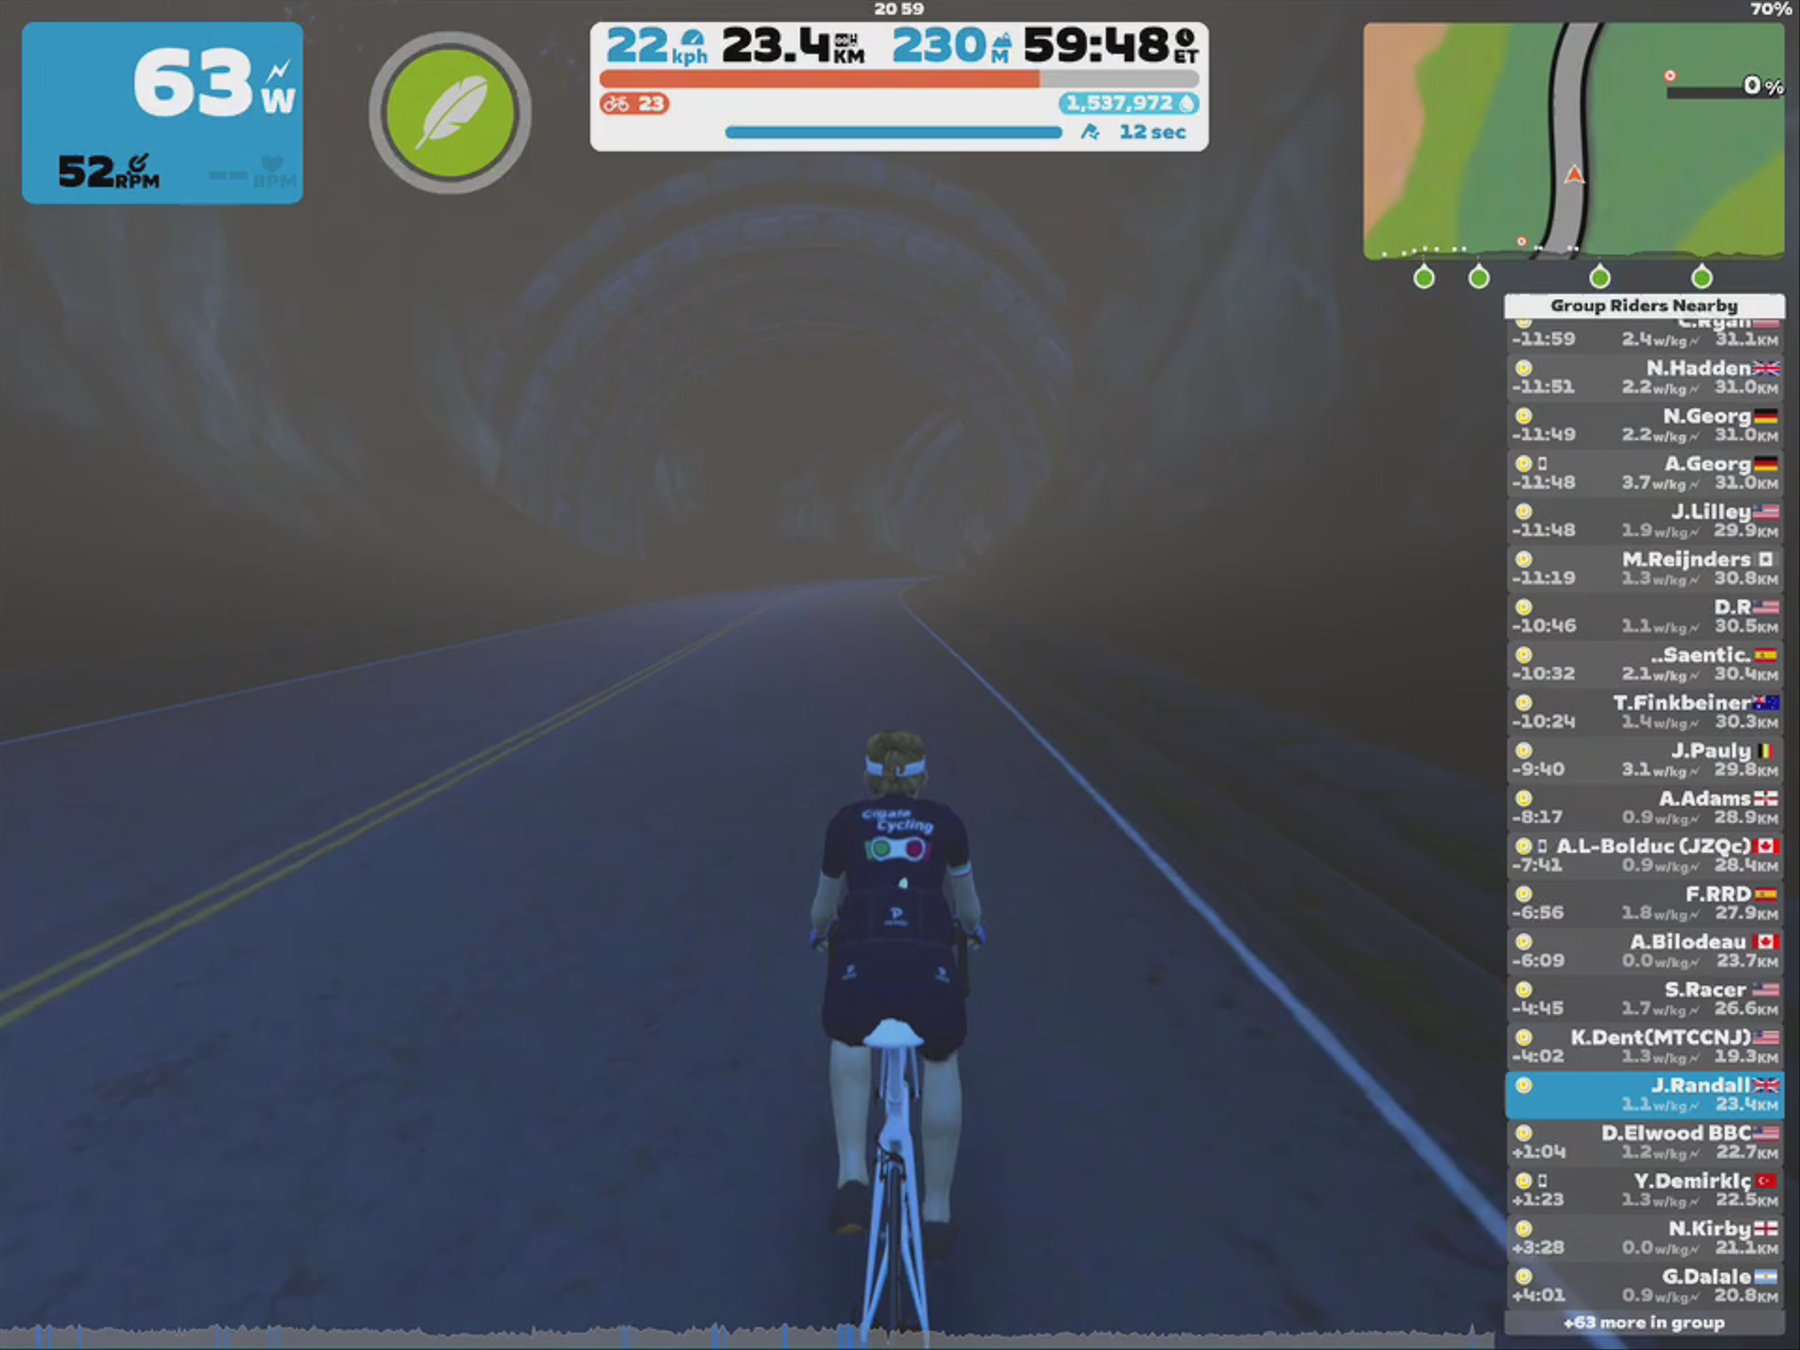 Zwift - Group Ride: Cigala Cycling Social Ride  (D) on Canopies and Coastlines in Watopia